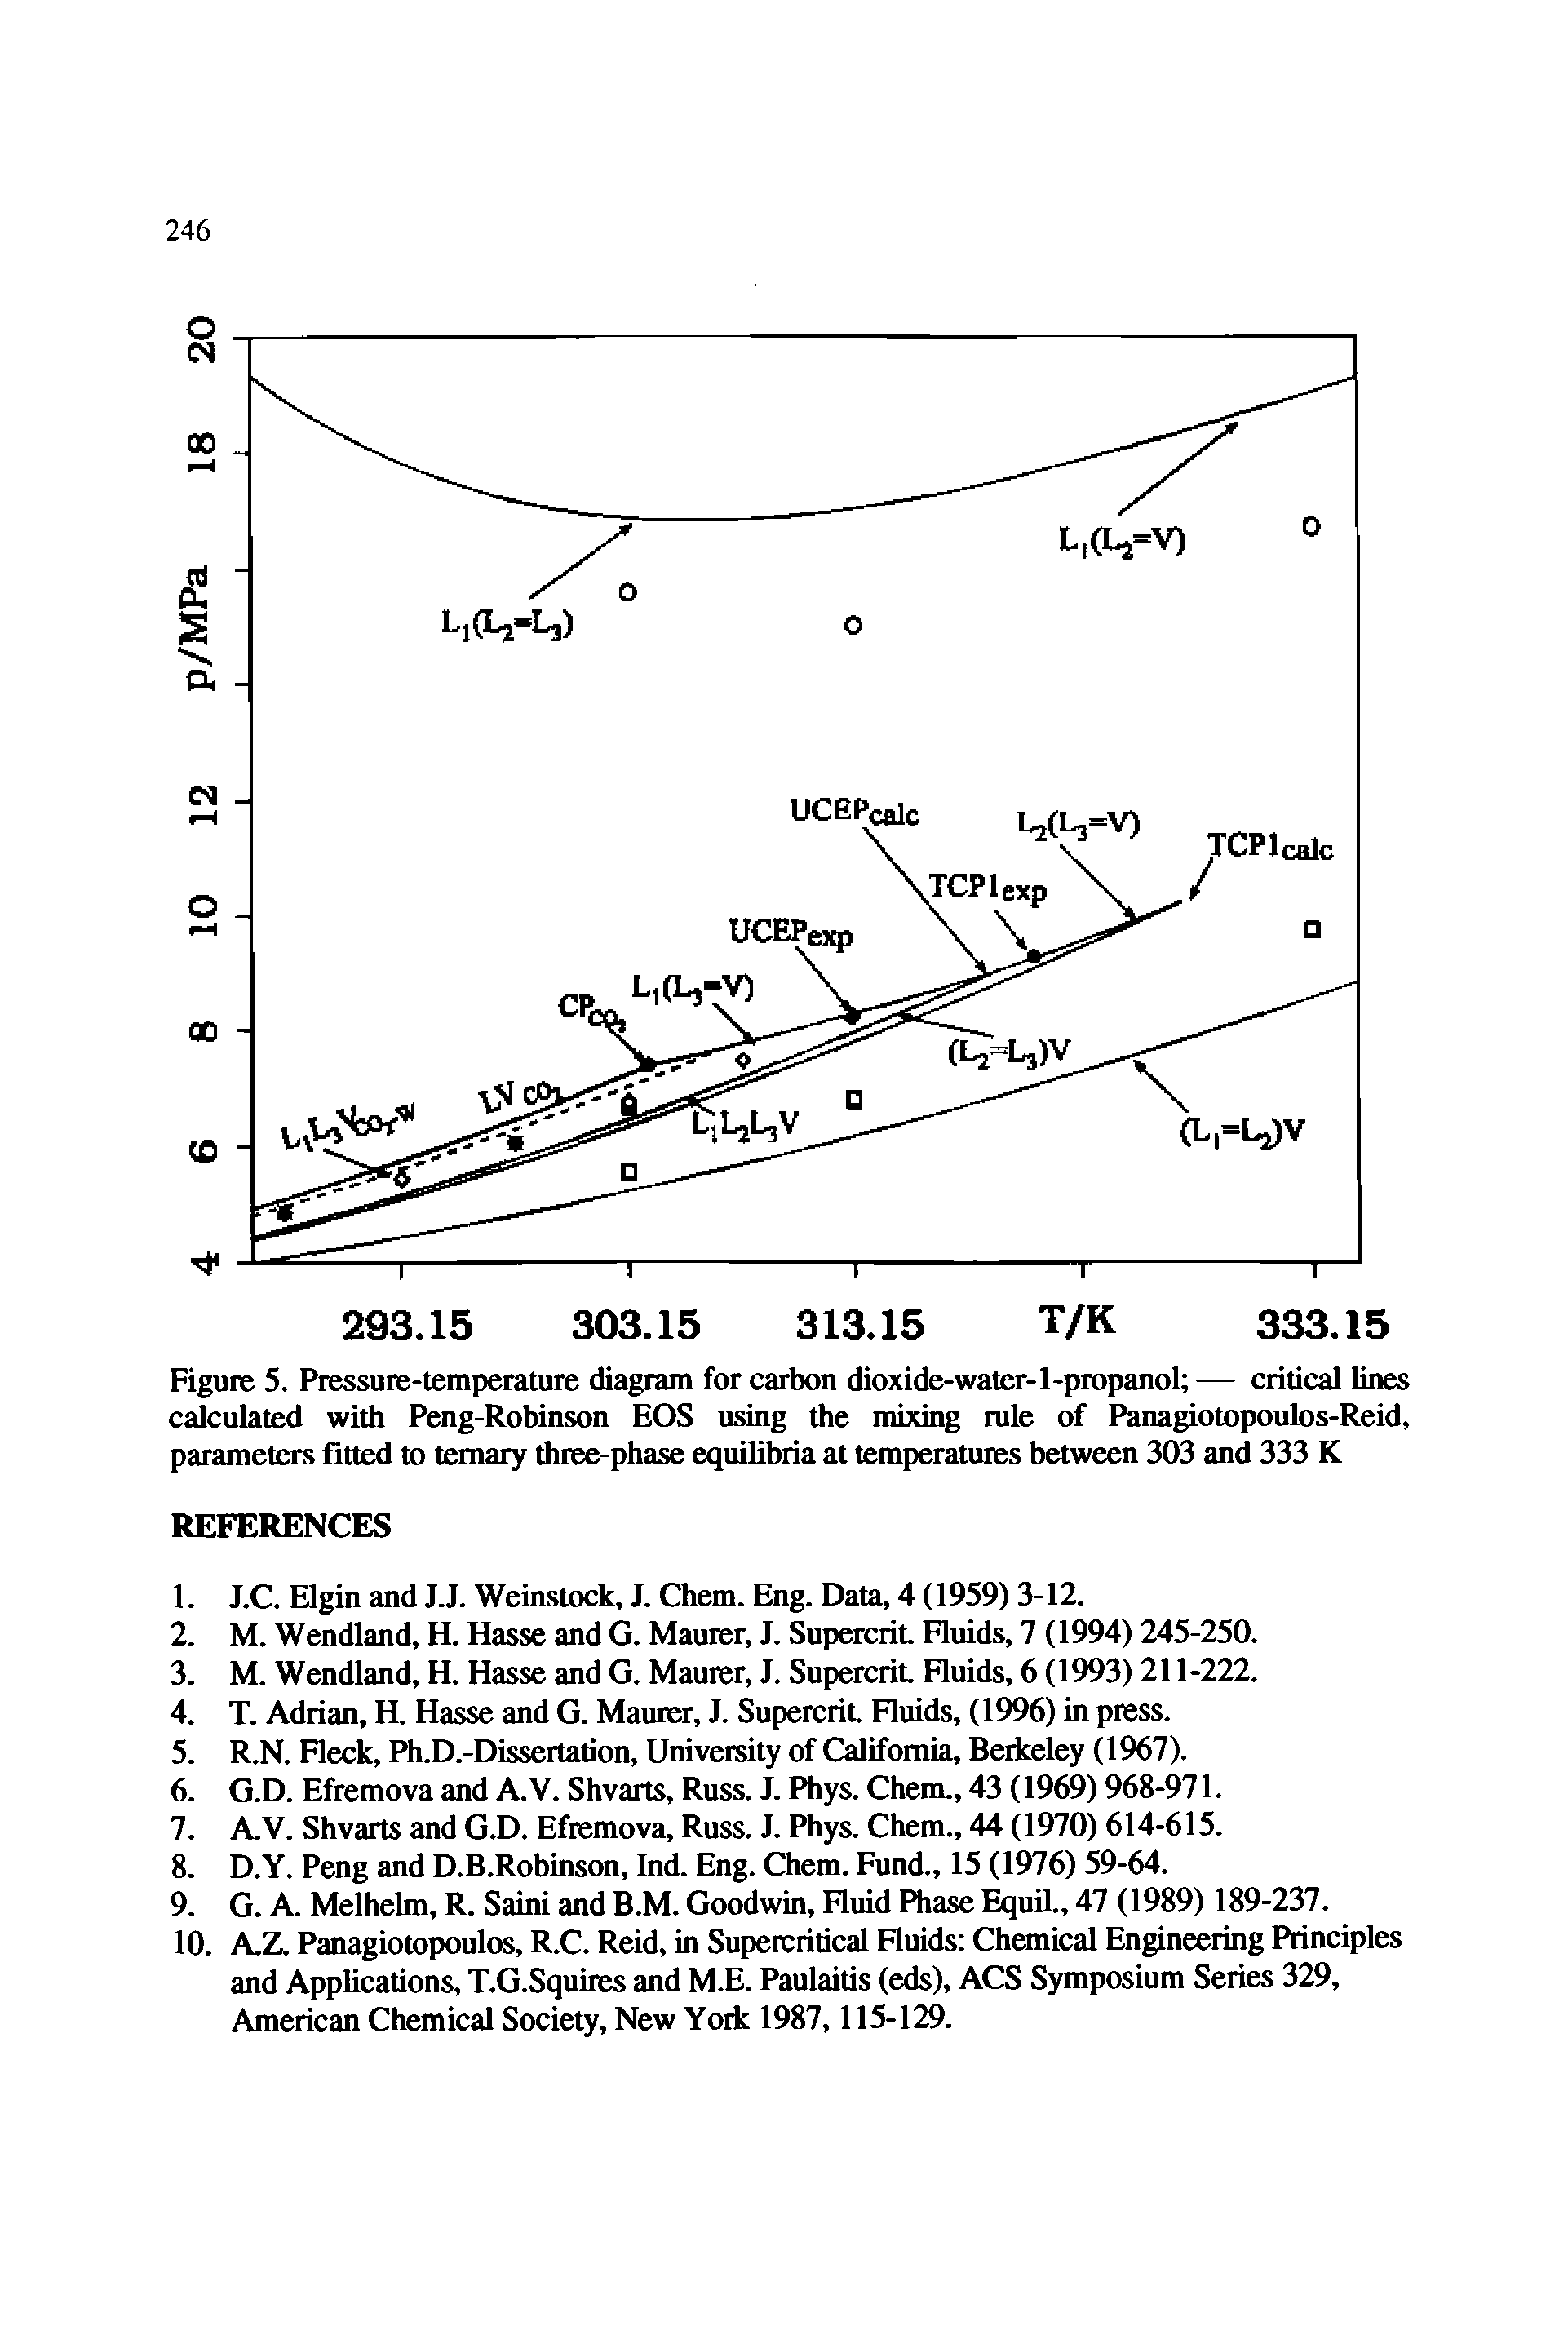 Figure 5. Pressure-temperature diagram for carbon dioxide-water-1-propanol — critical lines calculated with Peng-Robinson EOS using the mixing rule of Panagiotopoulos-Reid, parameters fitted to ternary three-phase equilibria at temperatures between 303 and 333 K...